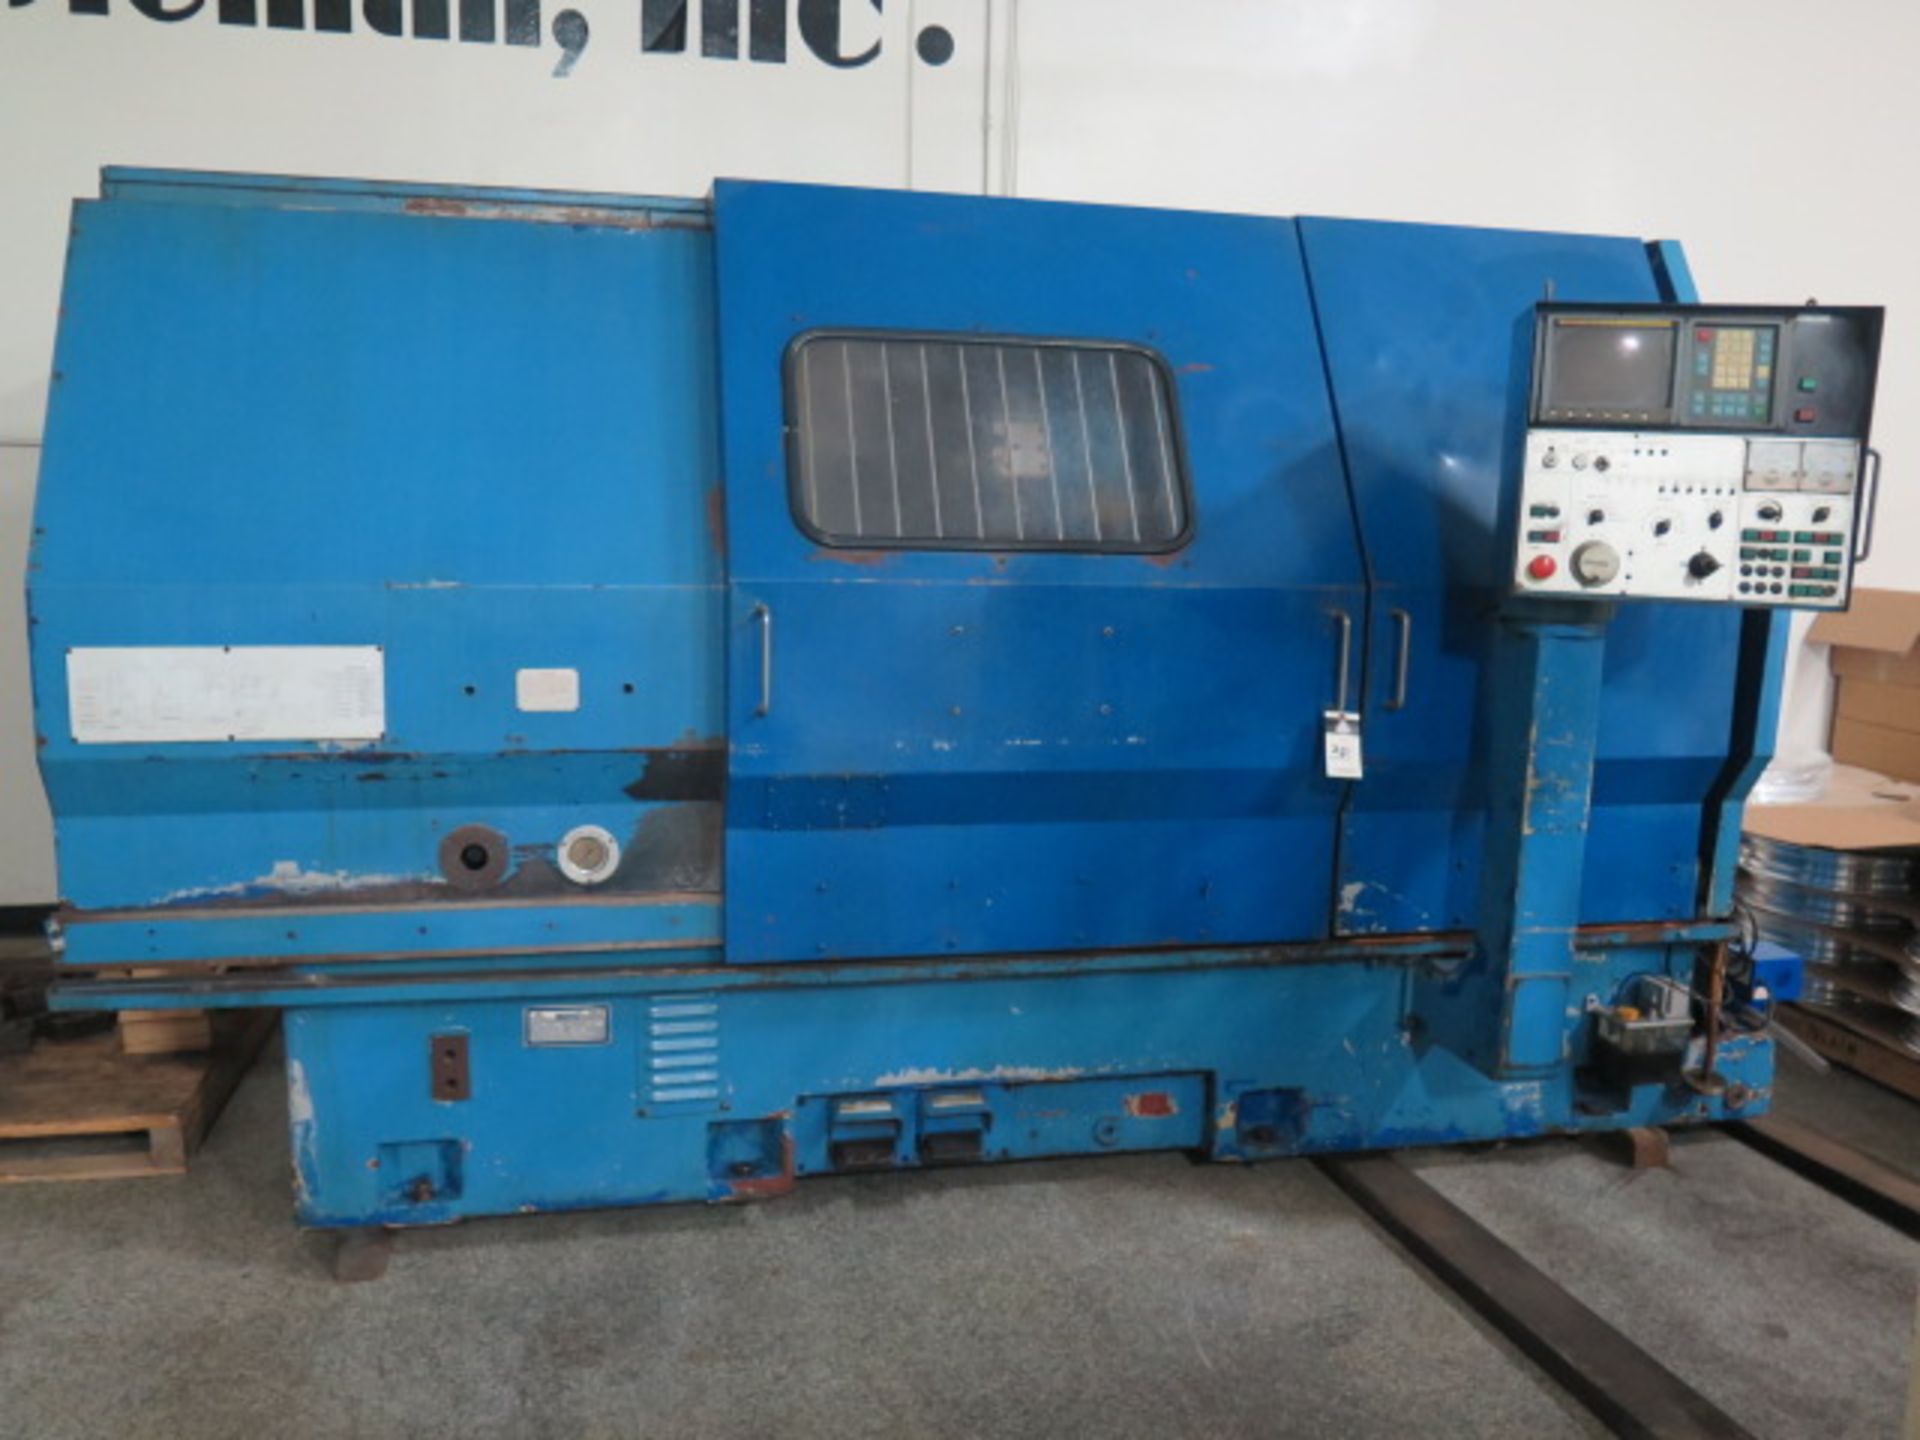 1991 Femco WNCL 35/100 CNC Turning Center s/n 1043 w/ Fanuc Series 0-T Controls, 12-Station